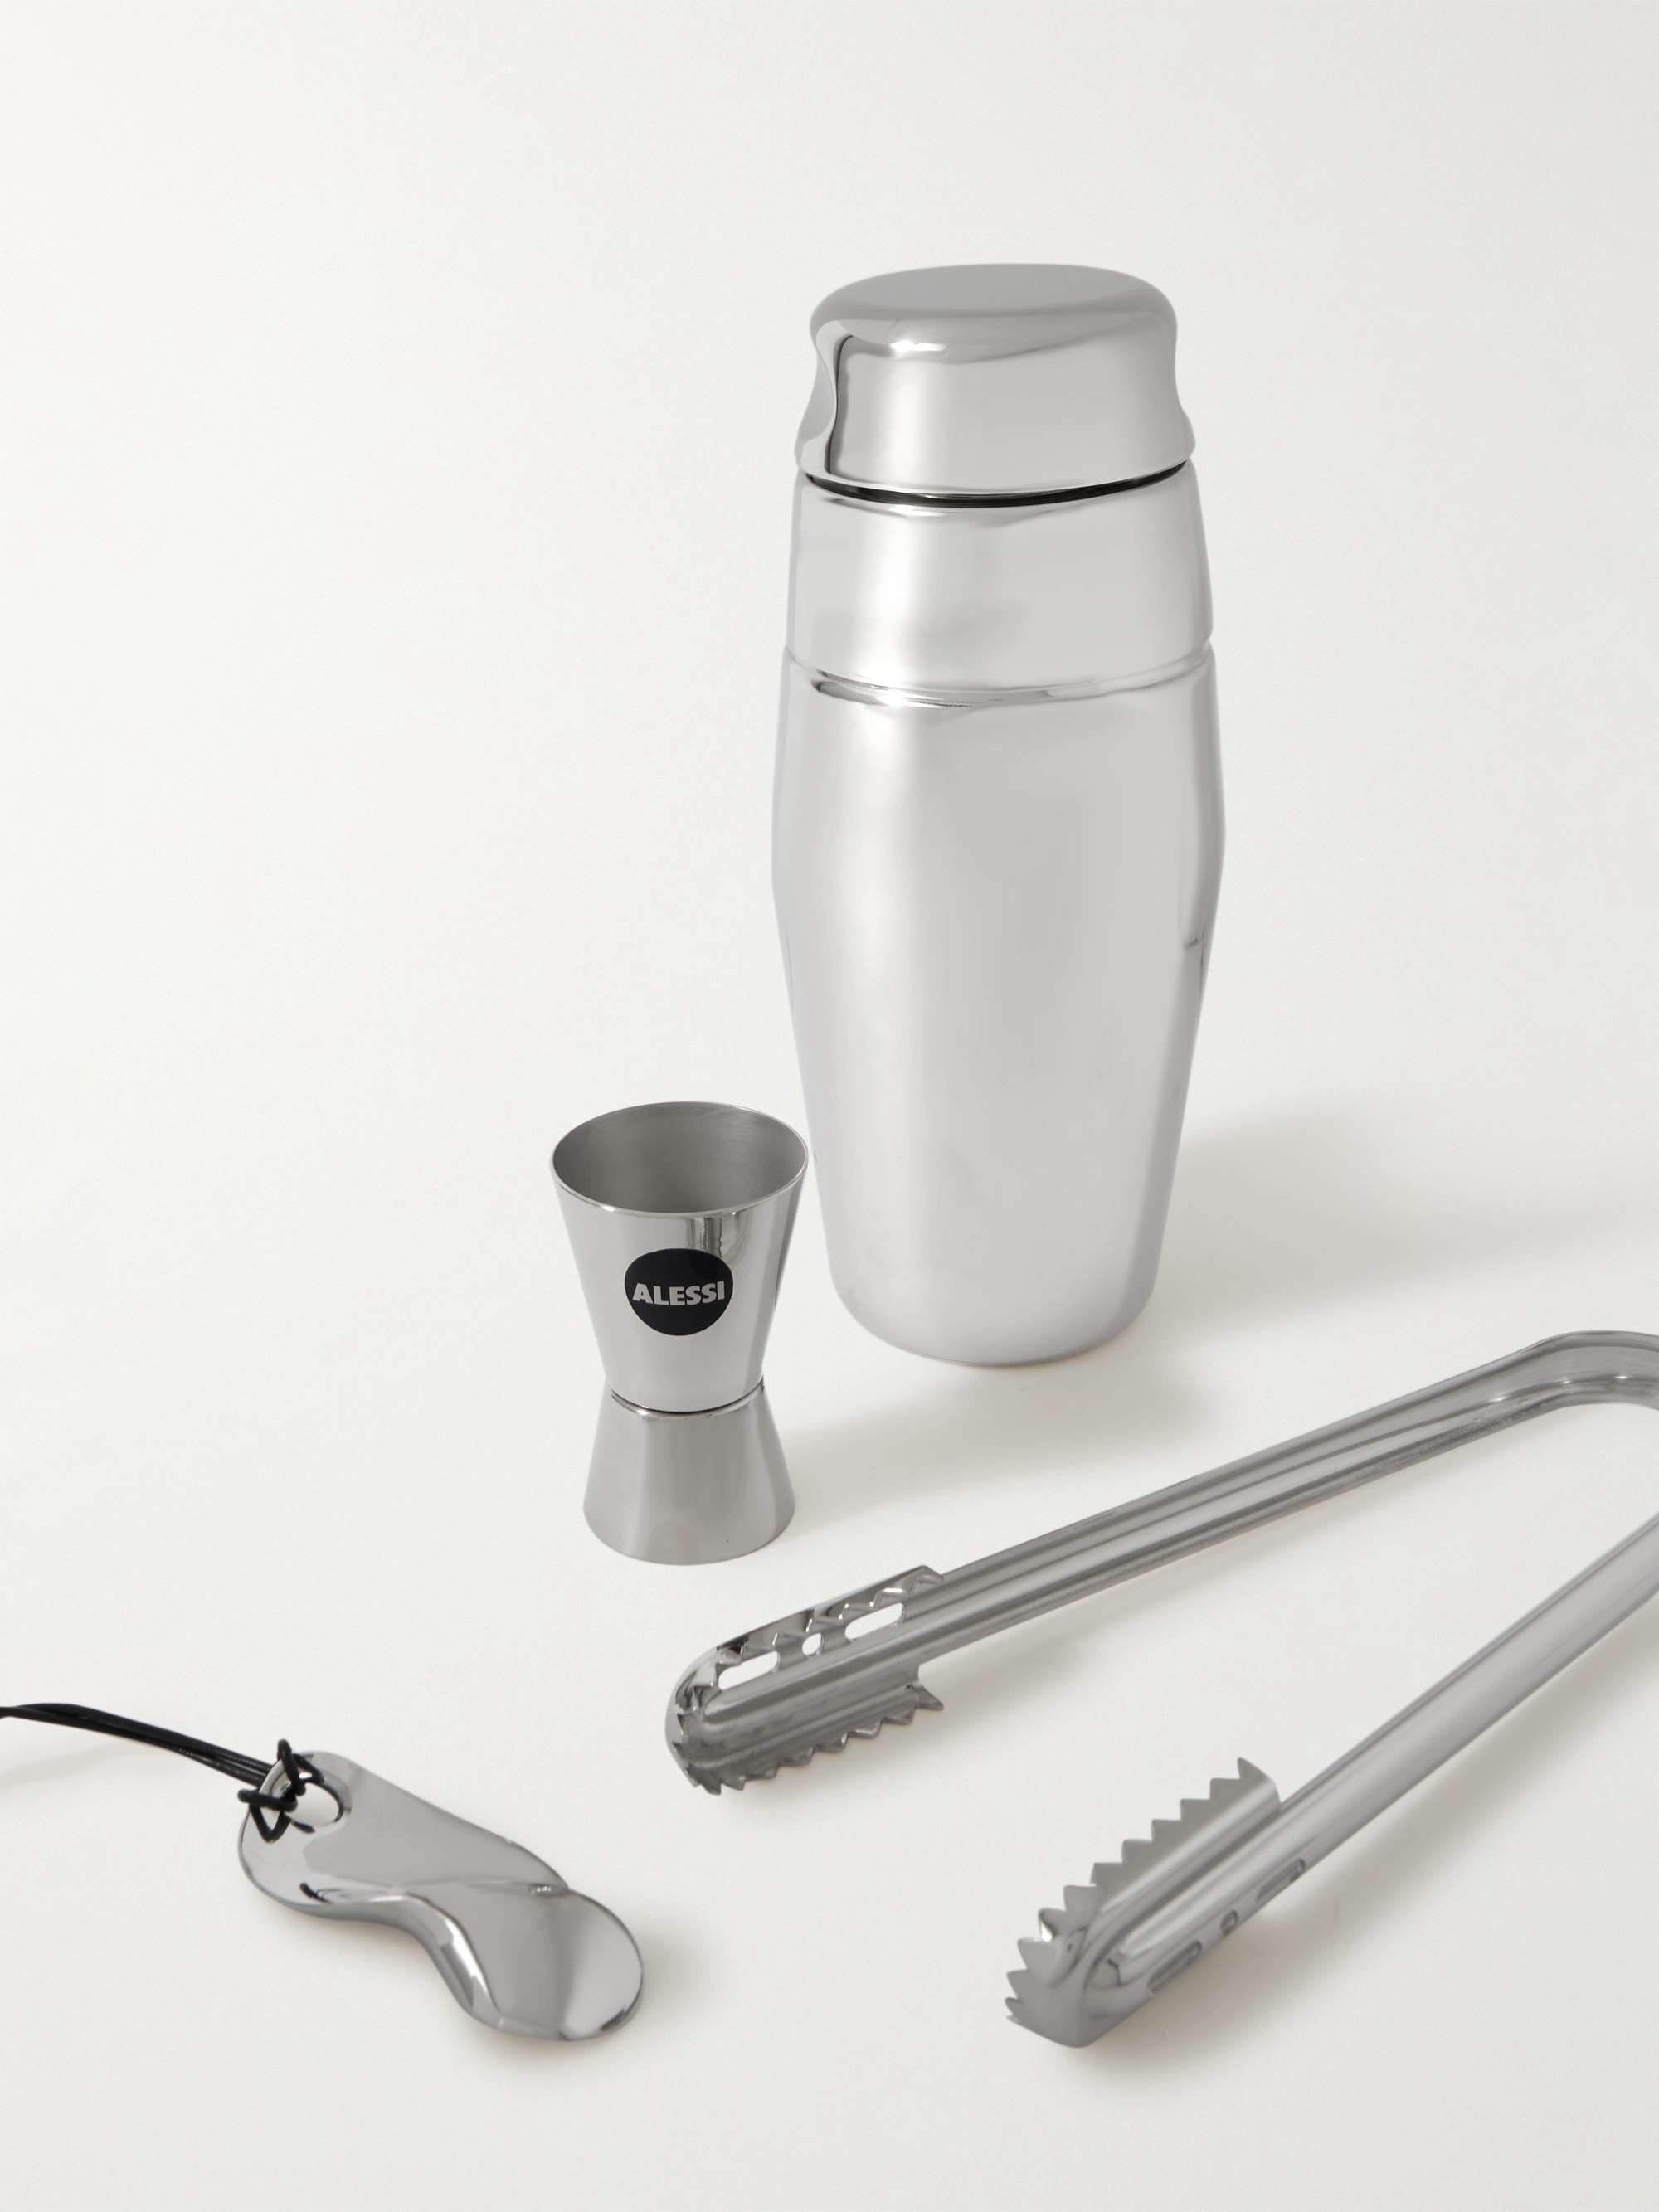 GLOBE-TROTTER + Alessi Leather-Trimmed Stainless Steel Cocktail Set